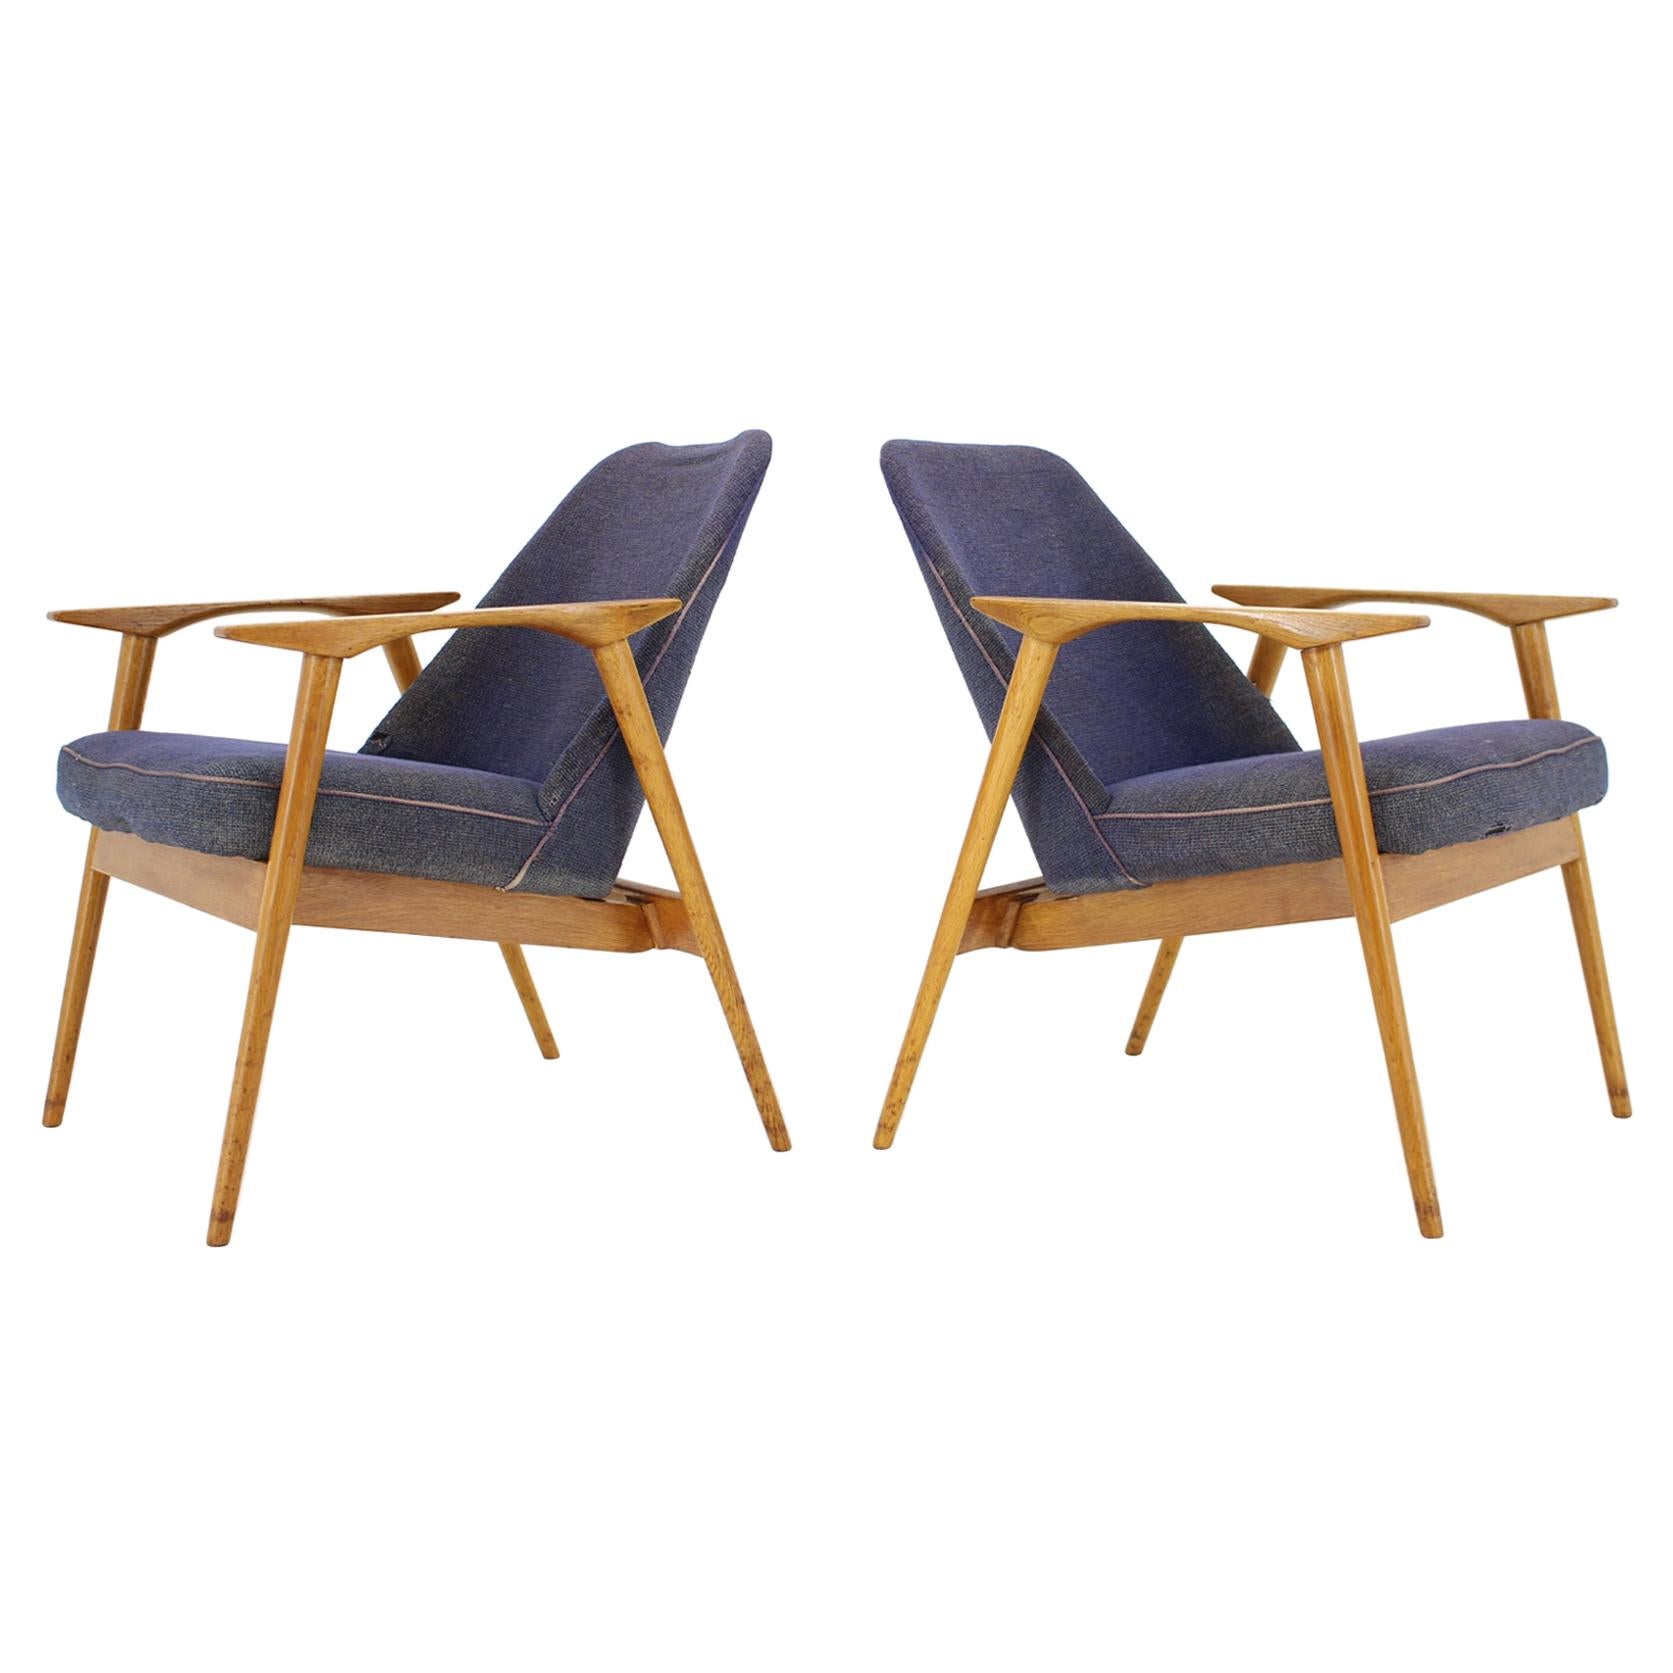 Set of Two Lounge Chairs Designed by Miroslav Navrátil, 1960s